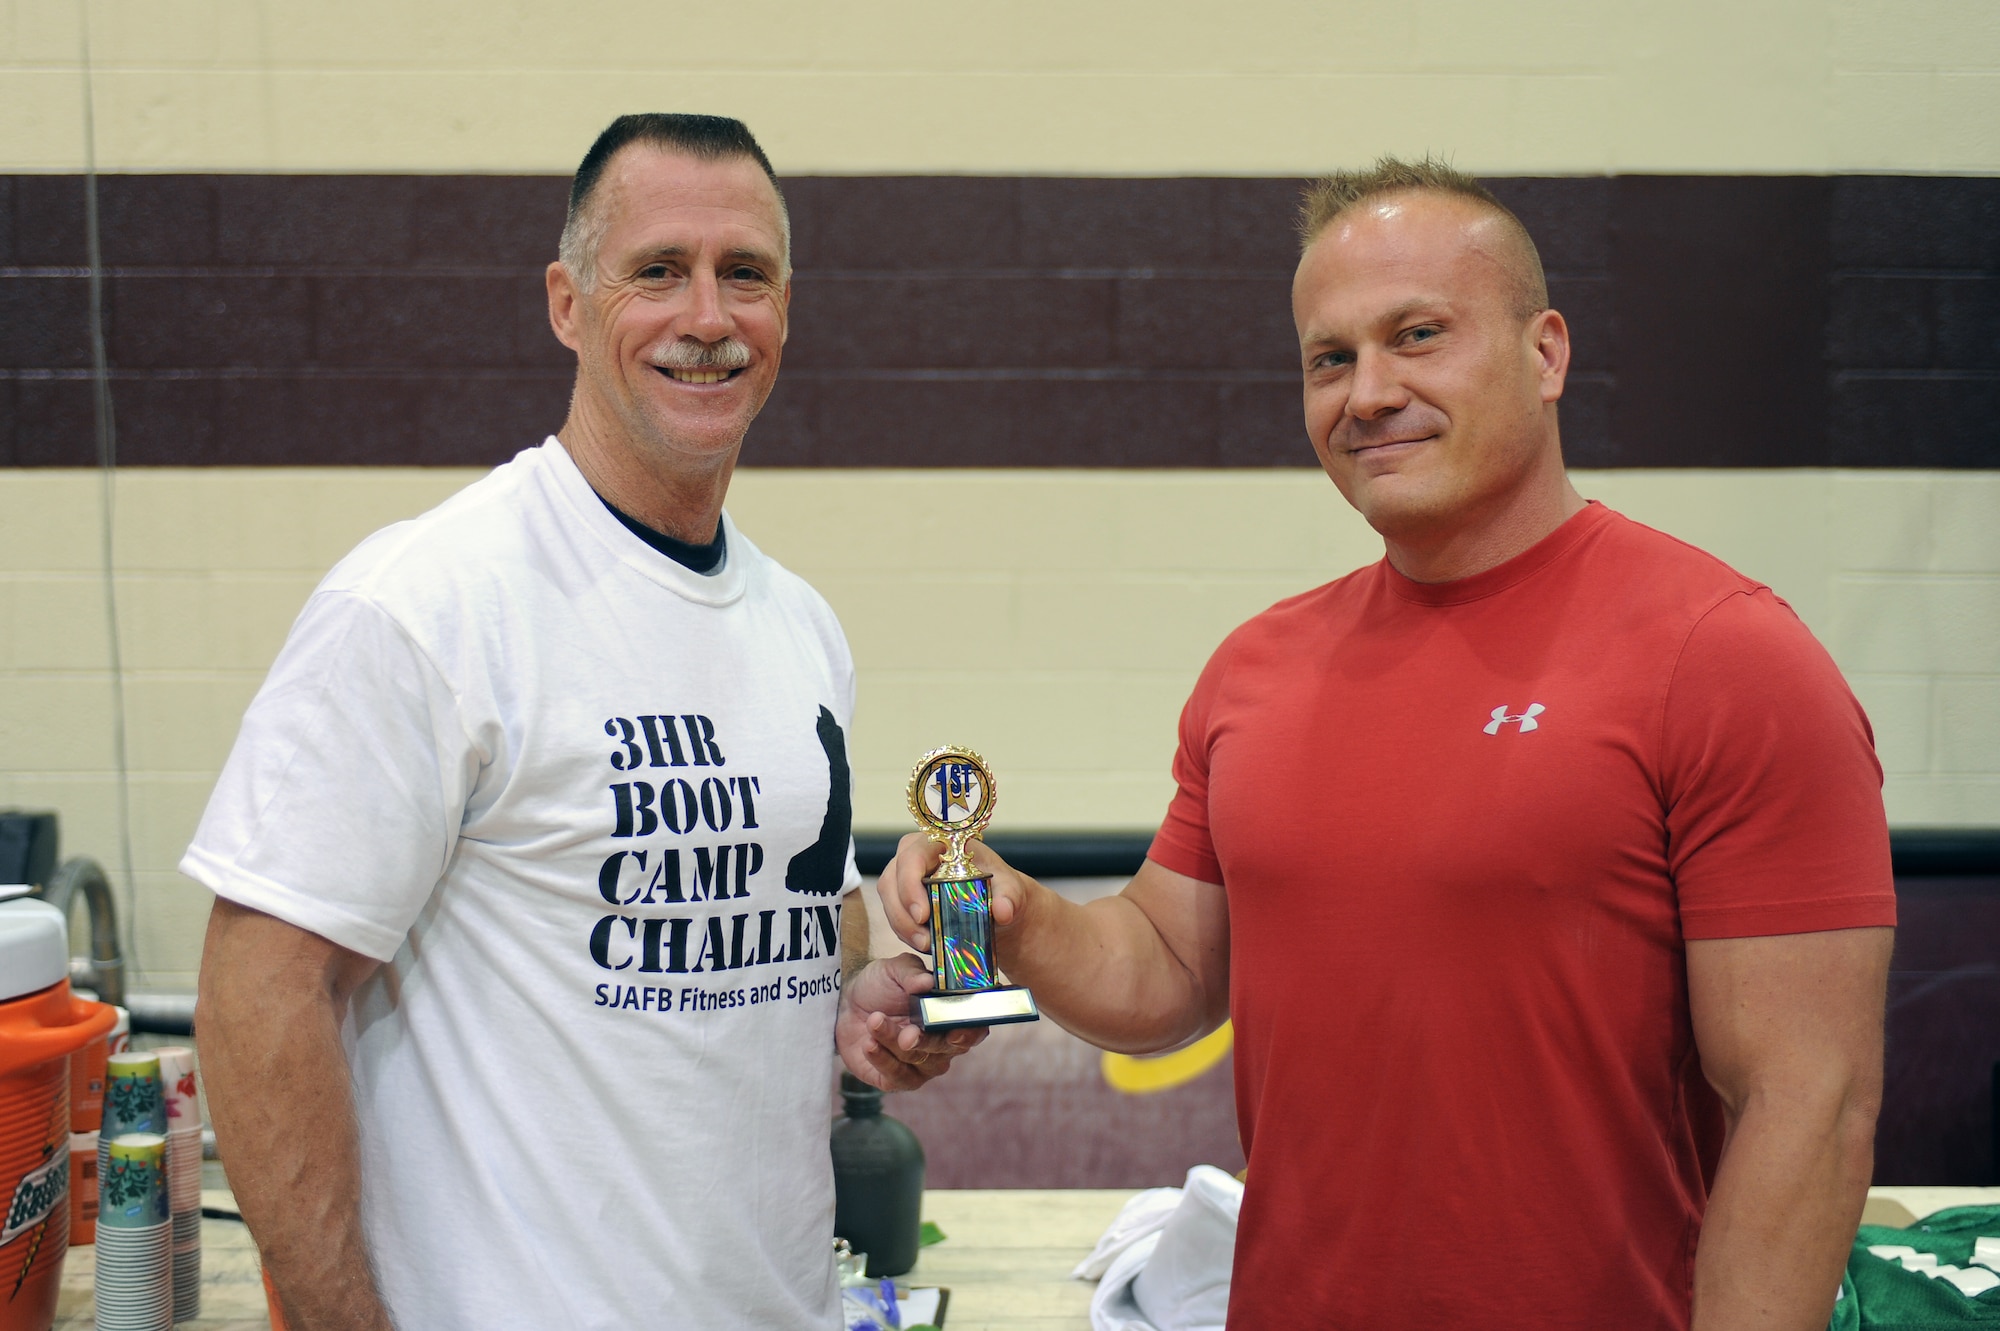 U.S. Air Force Senior Master Sgt. Timothy Moreland (left) and Mike Unden pose for a photo after a boot camp challenge on Seymour Johnson Air Force Base, N.C., June 9, 2012. Moreland competed for 2 hours and 47 minutes, outlasting 13 other competitors, to capture first place honors. Moreland, 916th Aerospace Medicine Squadron health services superintendent, is a native of Hollywood, Fla. Unden, 4th Force Support Squadron military fitness specialist, is from Wichita, Kan. (U.S. Air Force photo/Airman 1st Class John Nieves Camacho/Released)